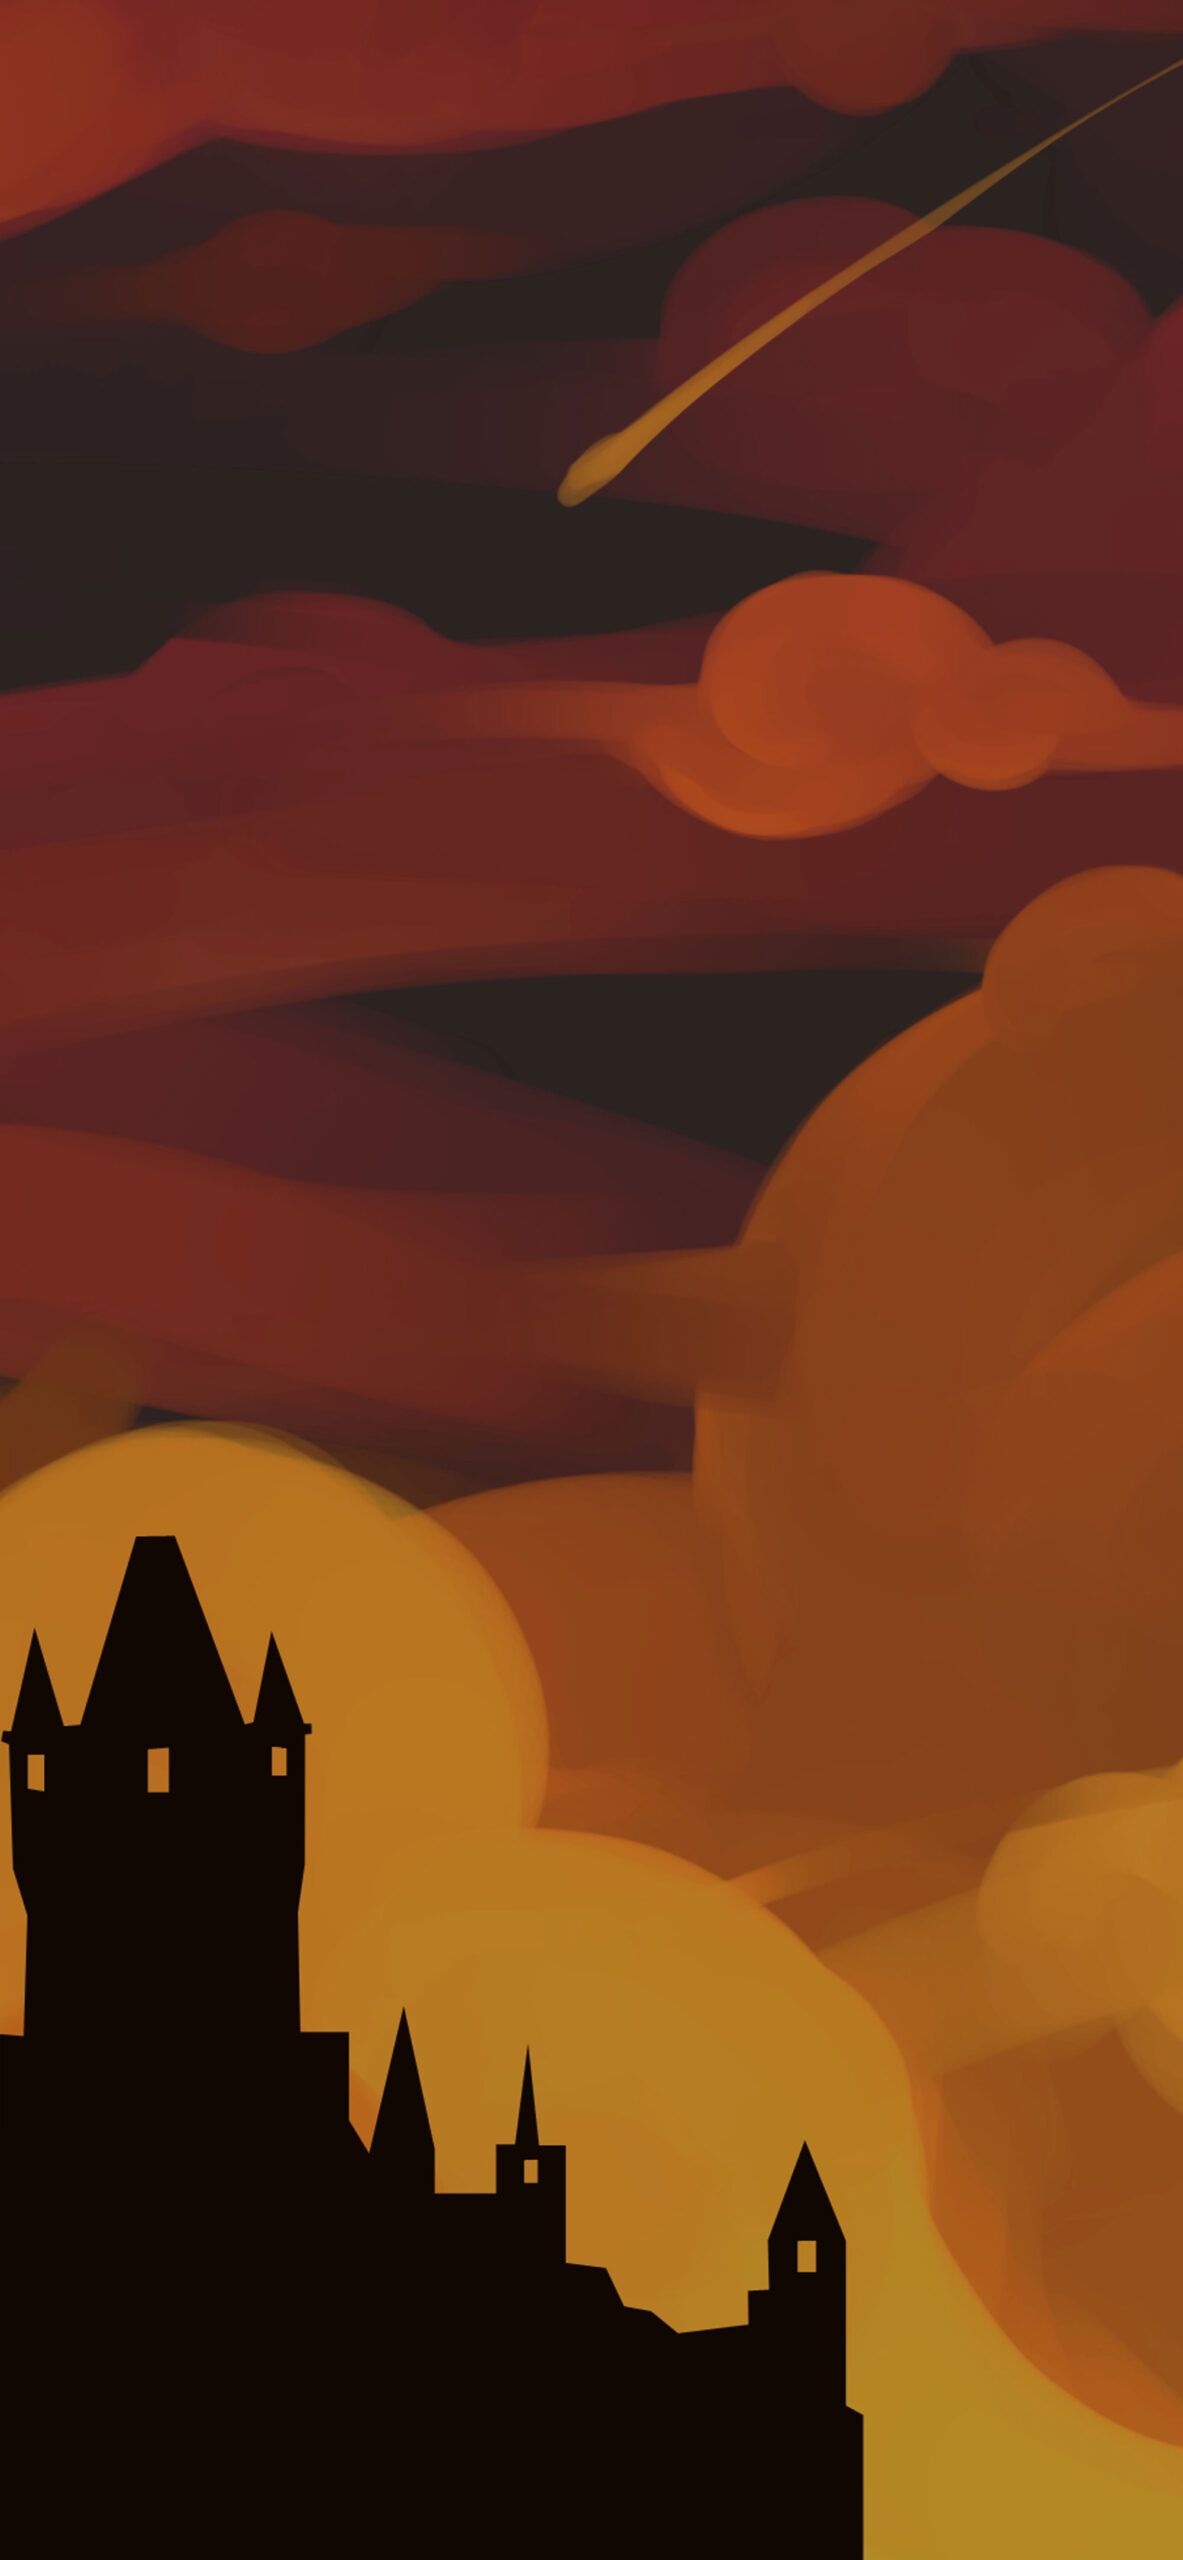 A castle sits in the foreground of a sunset with a shooting star in the sky. - Gothic, castle